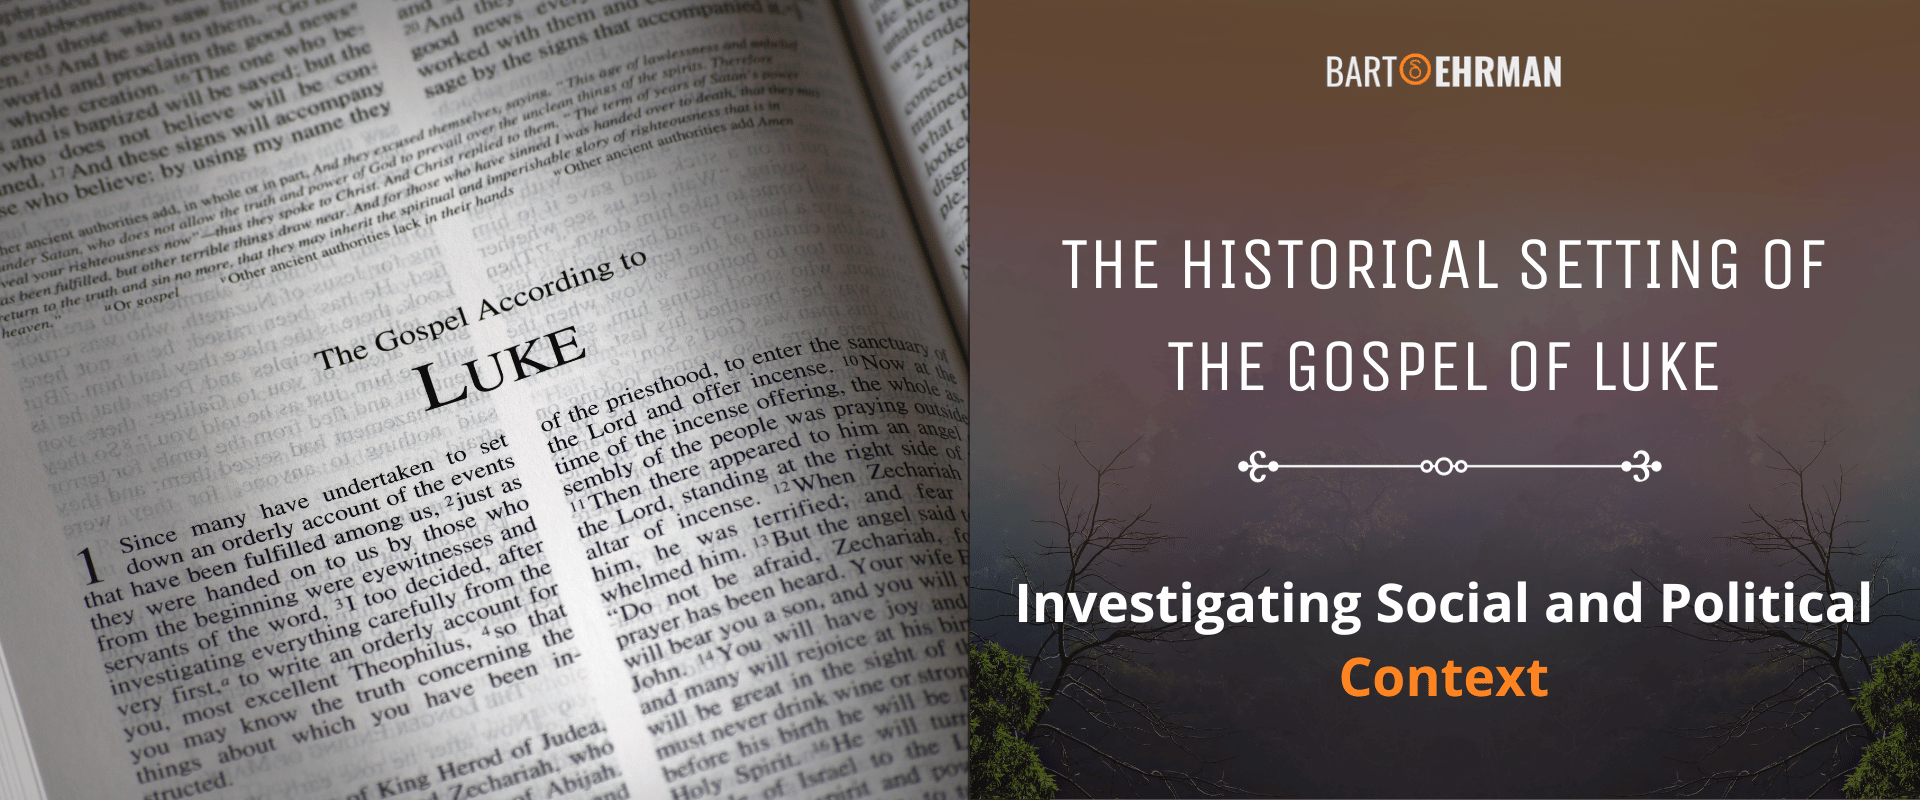 The Historical Setting of the Gospel of Luke - Investigating Social and Political Context